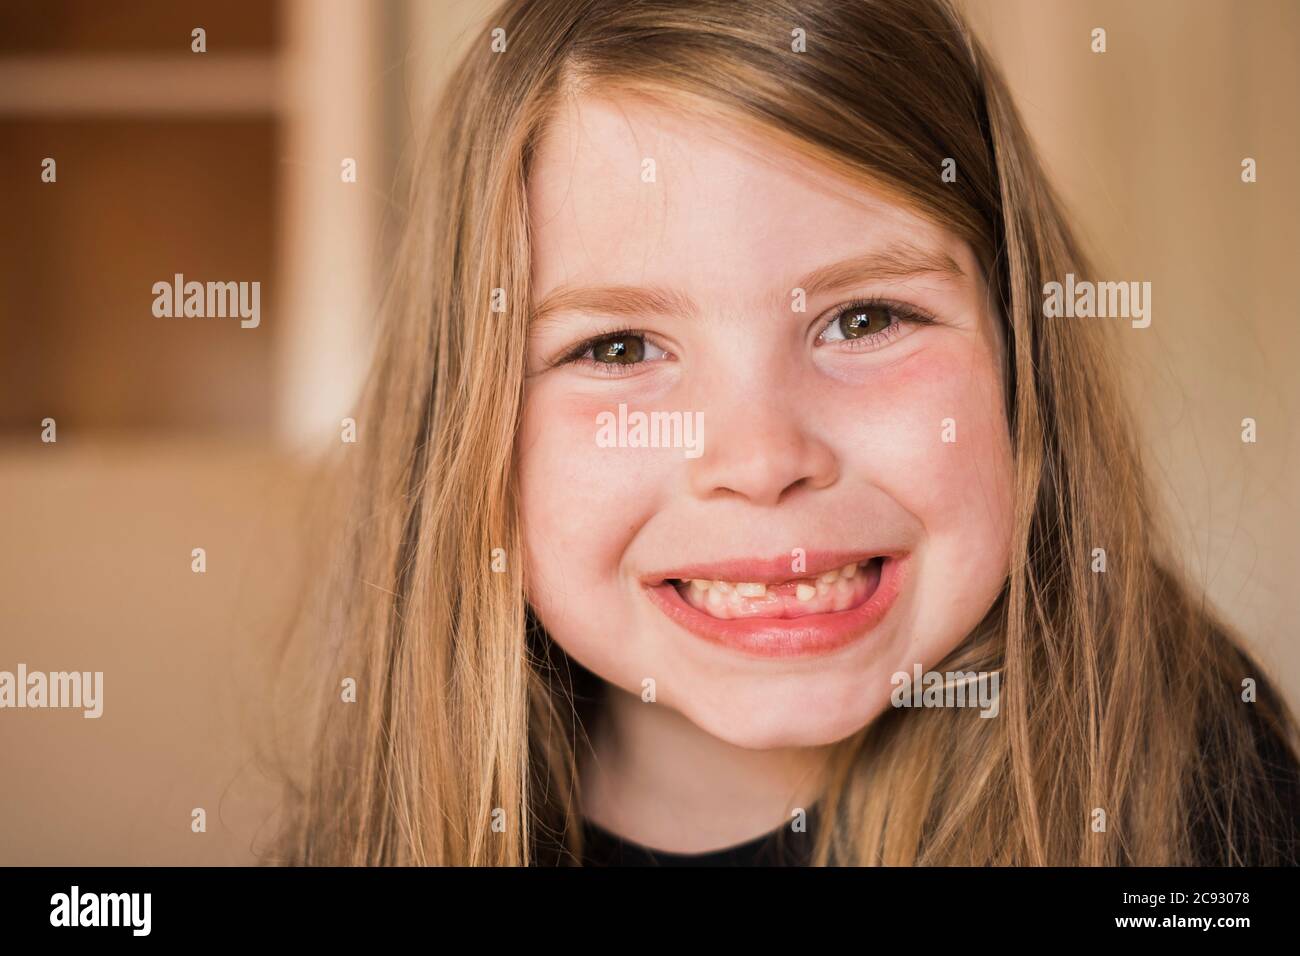 Closeup of a young girls mouth with missing teeth Stock Photo